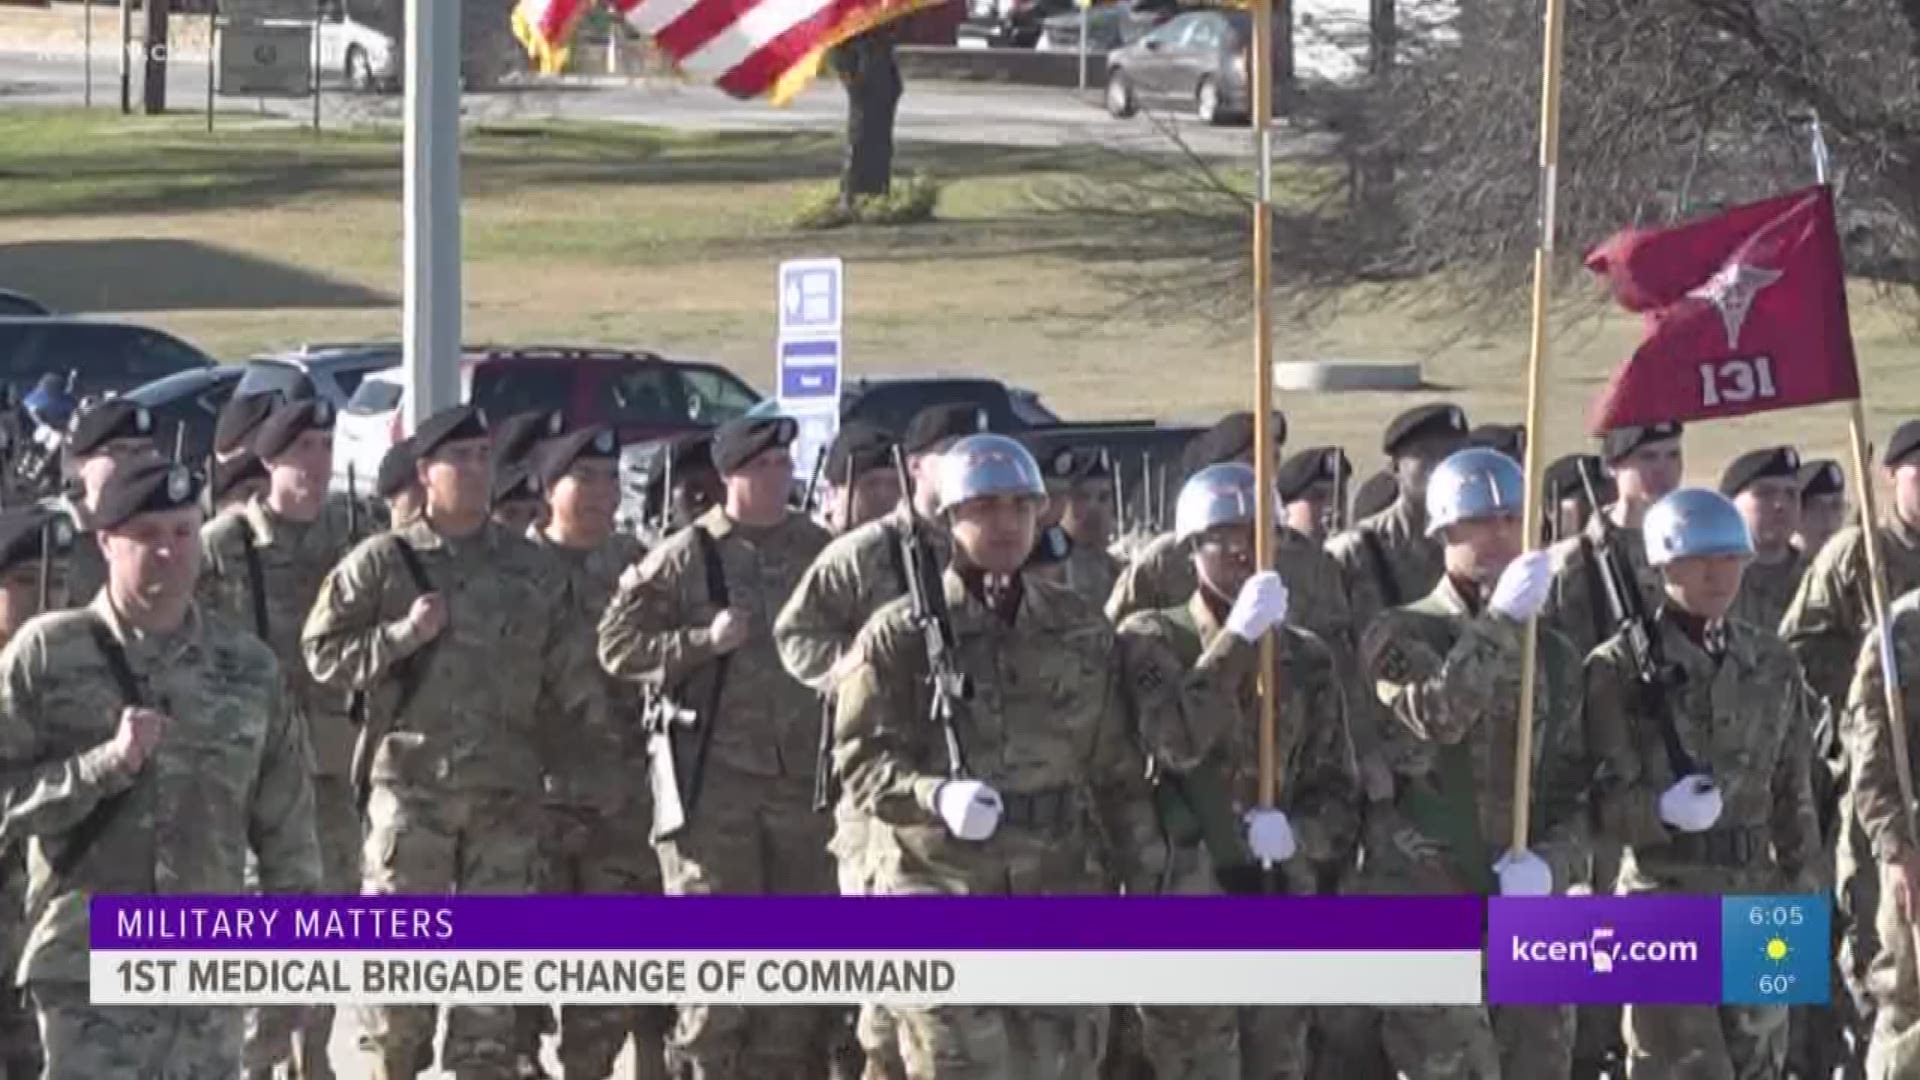 Colonel Robert F. Howe is the new Commander of the 1st Medical Brigade at Fort Hood. Soldiers also had the opportunity to attend Fort Hood's first ever credentialing fair.